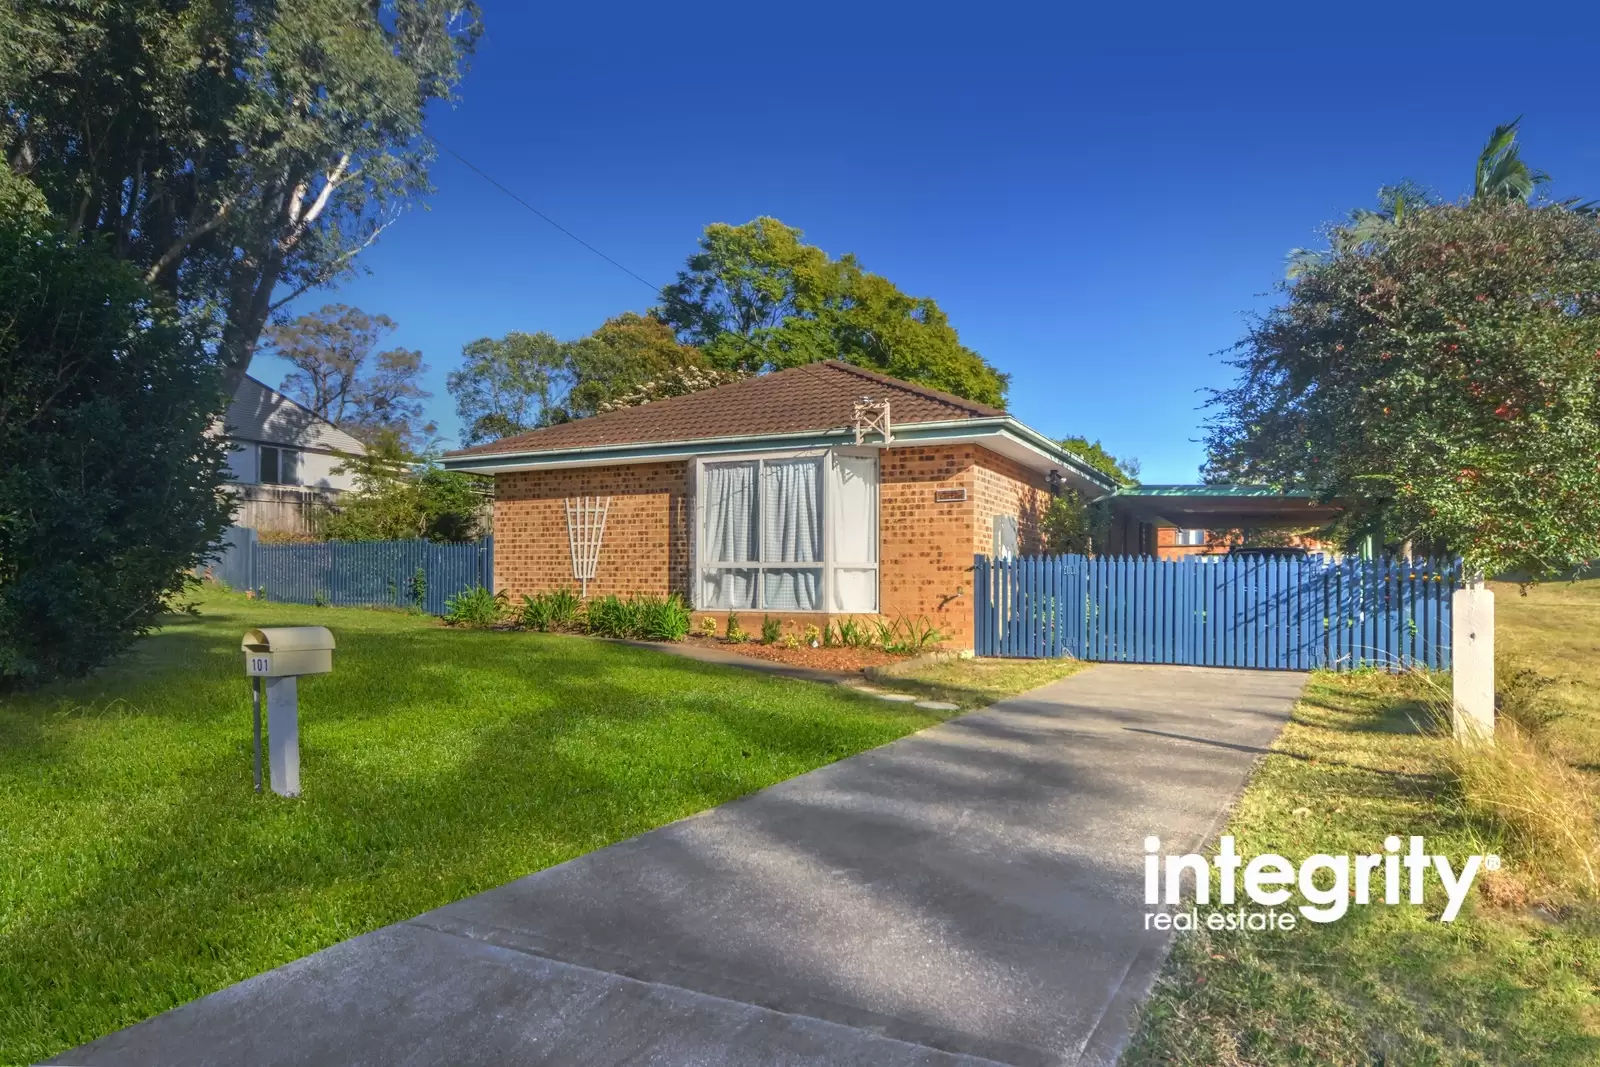 101 Meroo Road, Bomaderry Sold by Integrity Real Estate